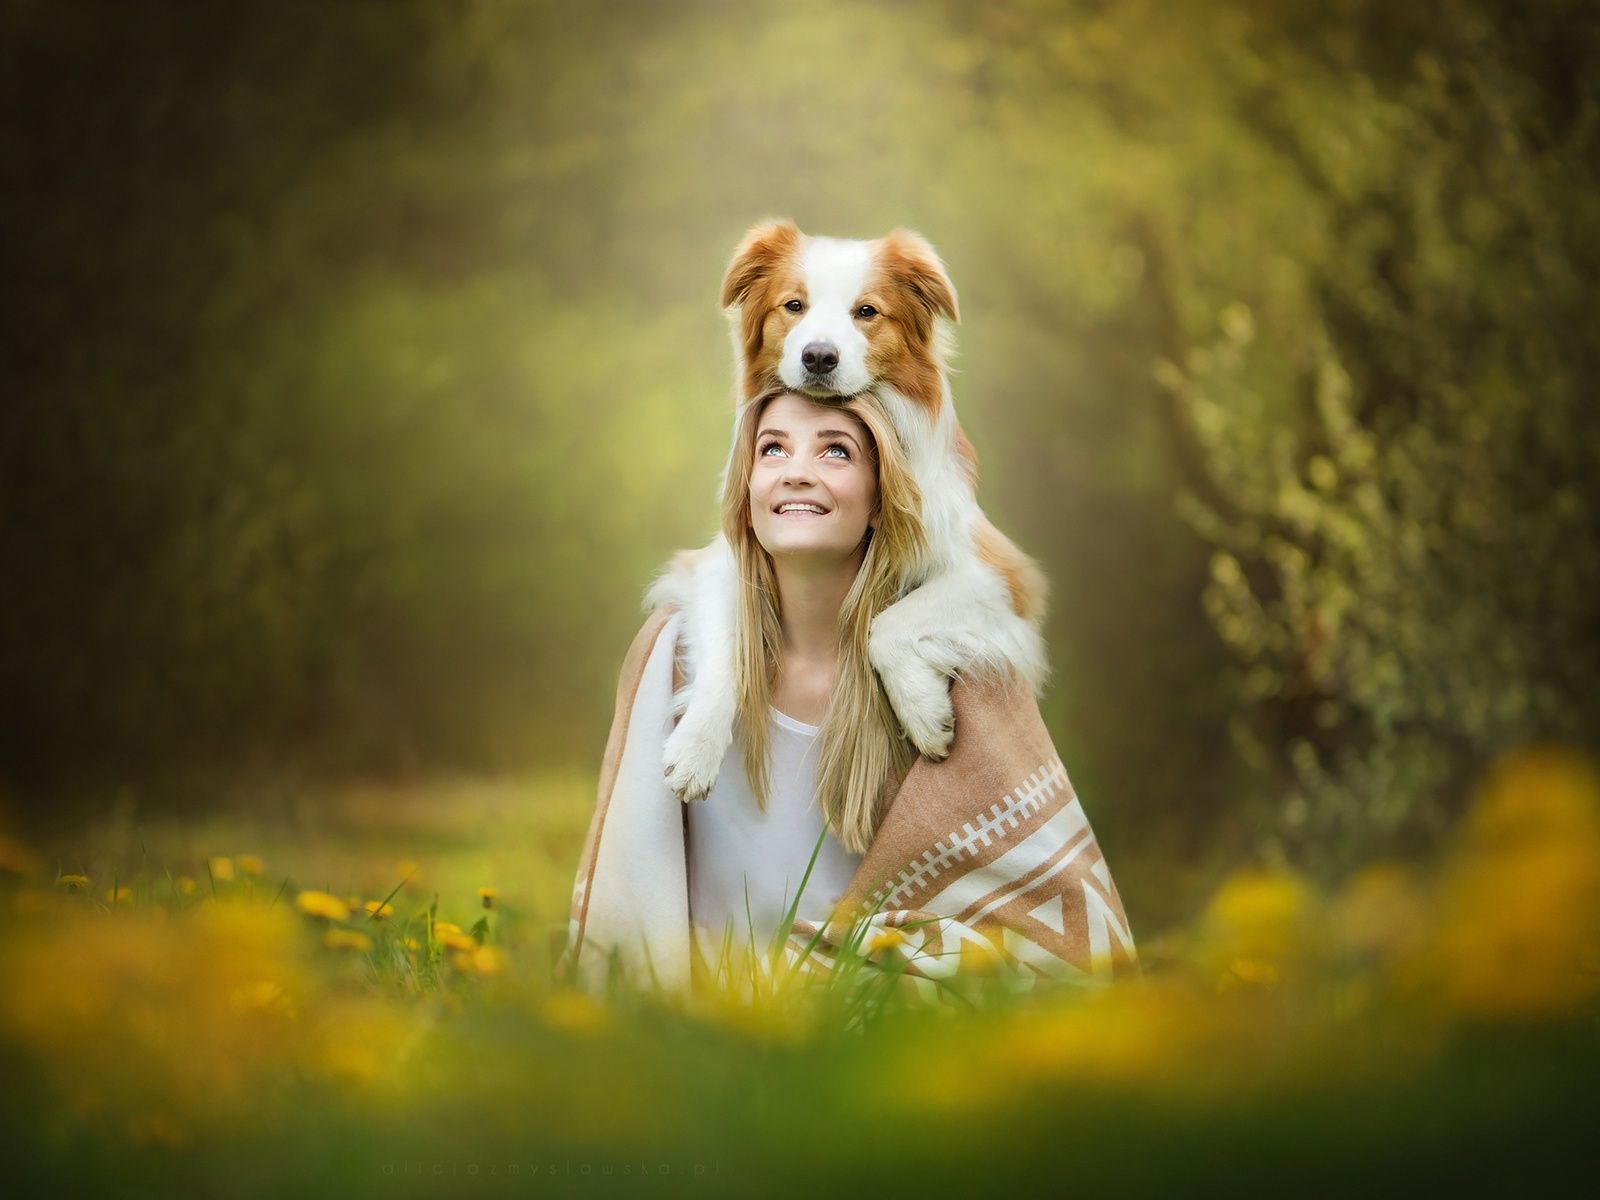 Cute Girl With Dog 1600x1200 Resolution HD 4k Wallpaper, Image, Background, Photo and Picture